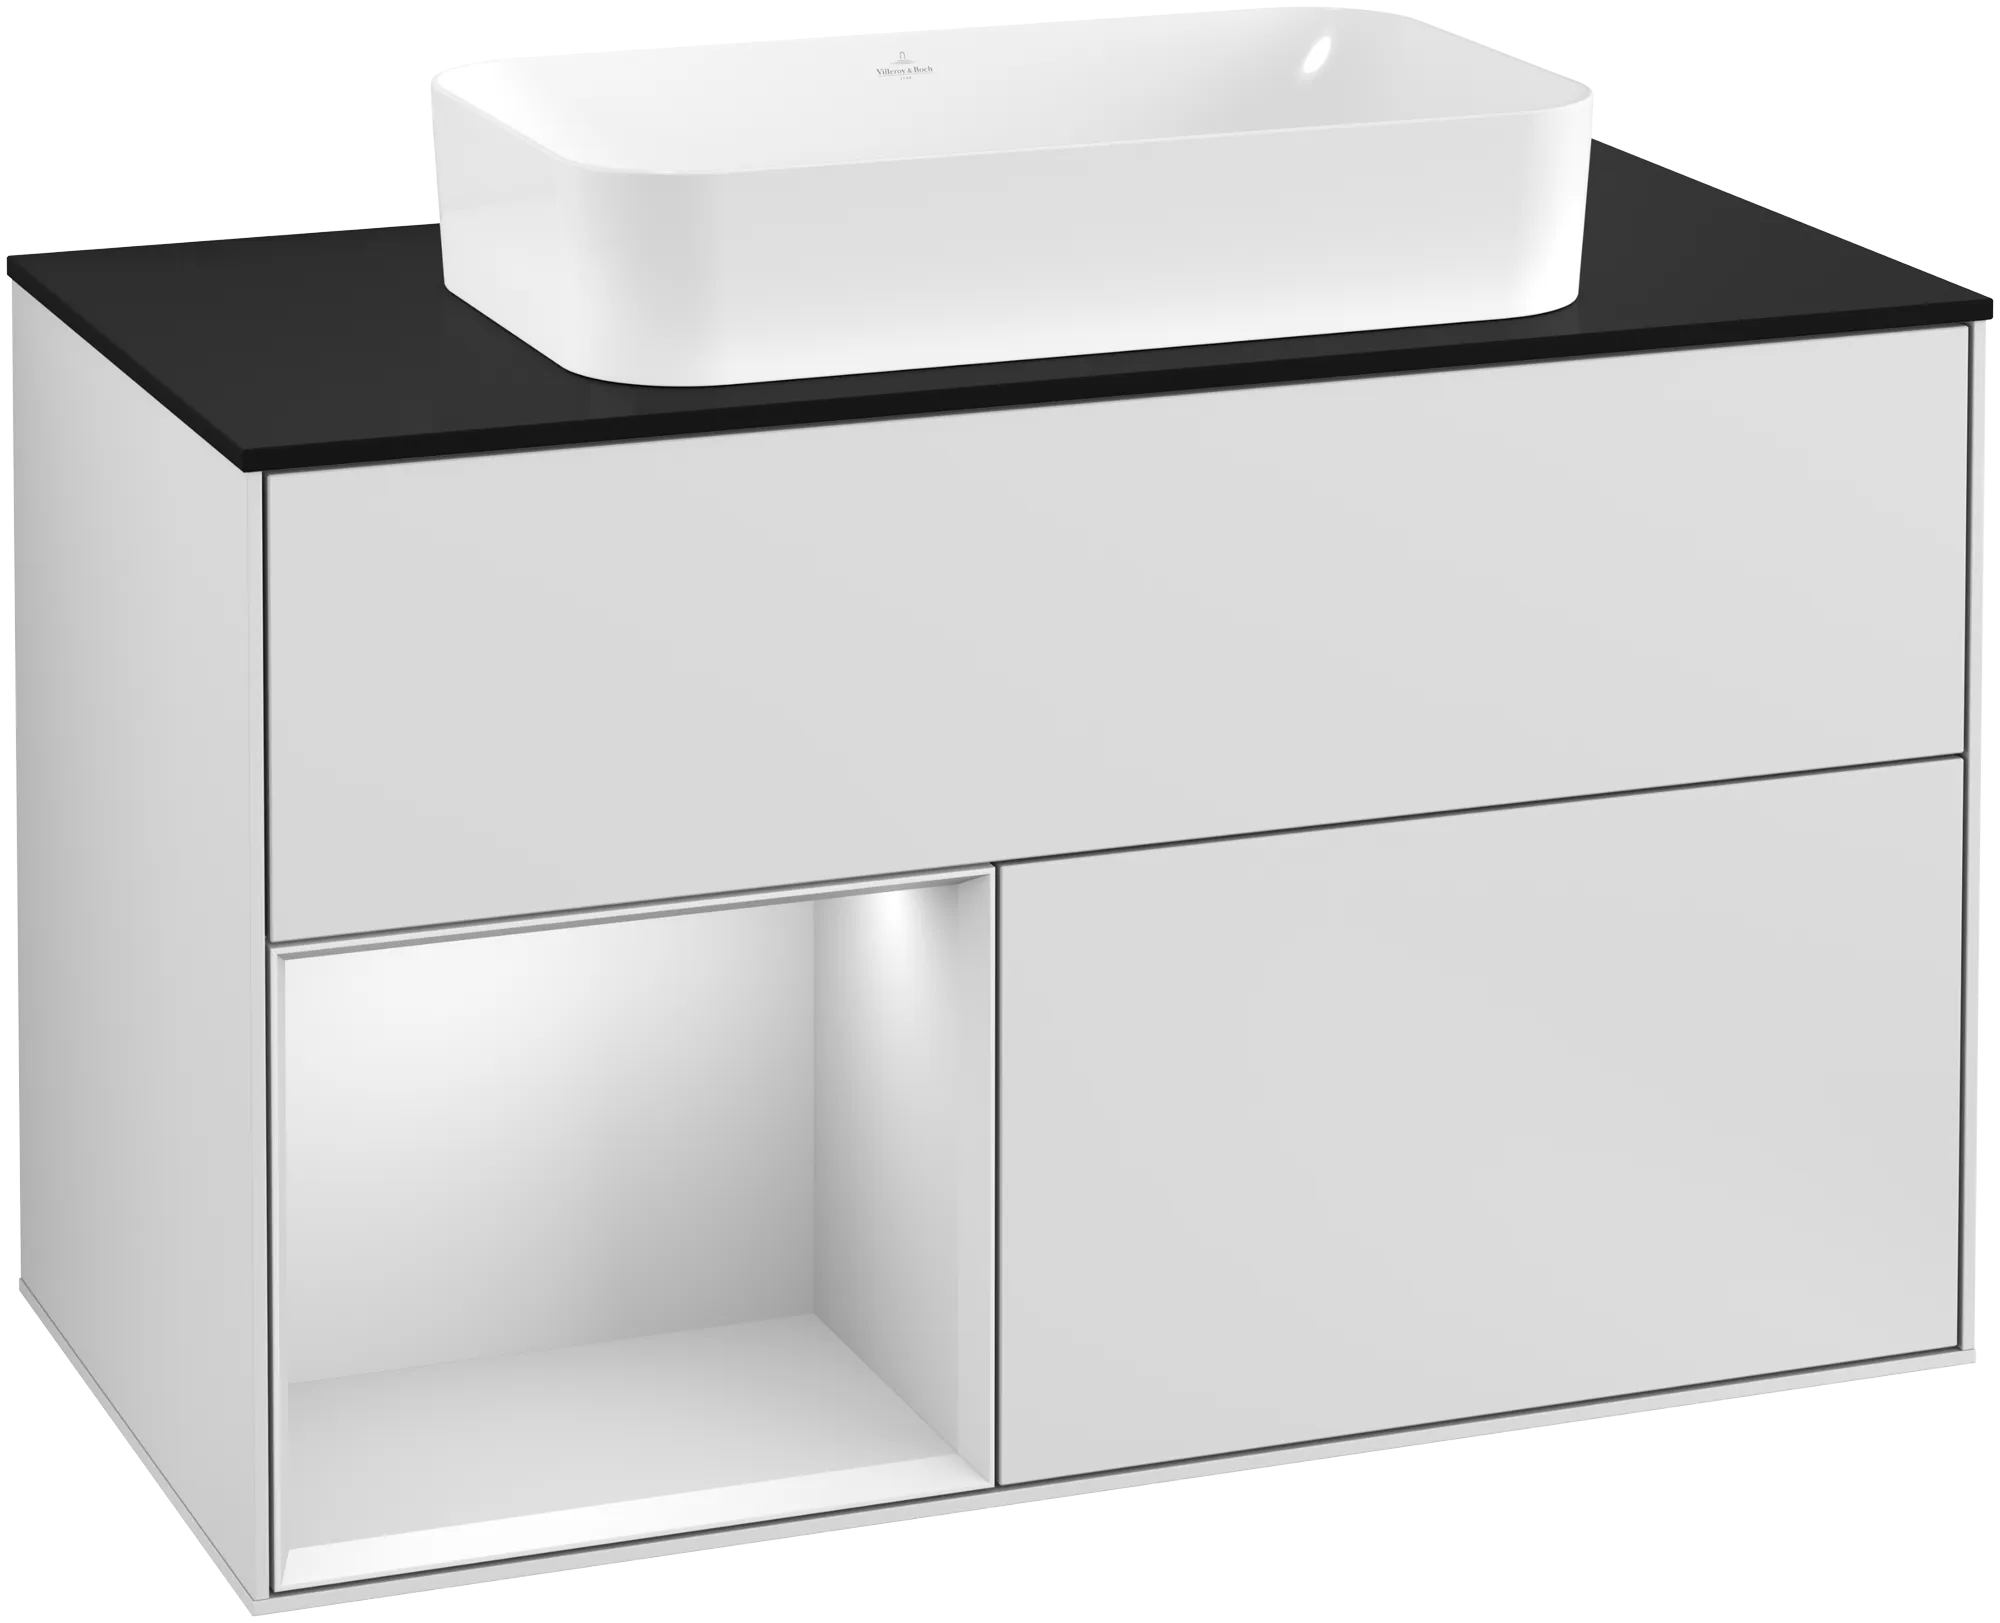 VILLEROY BOCH Finion Vanity unit, with lighting, 2 pull-out compartments, 1000 x 603 x 501 mm, White Matt Lacquer / White Matt Lacquer / Glass Black Matt #G242MTMT resmi